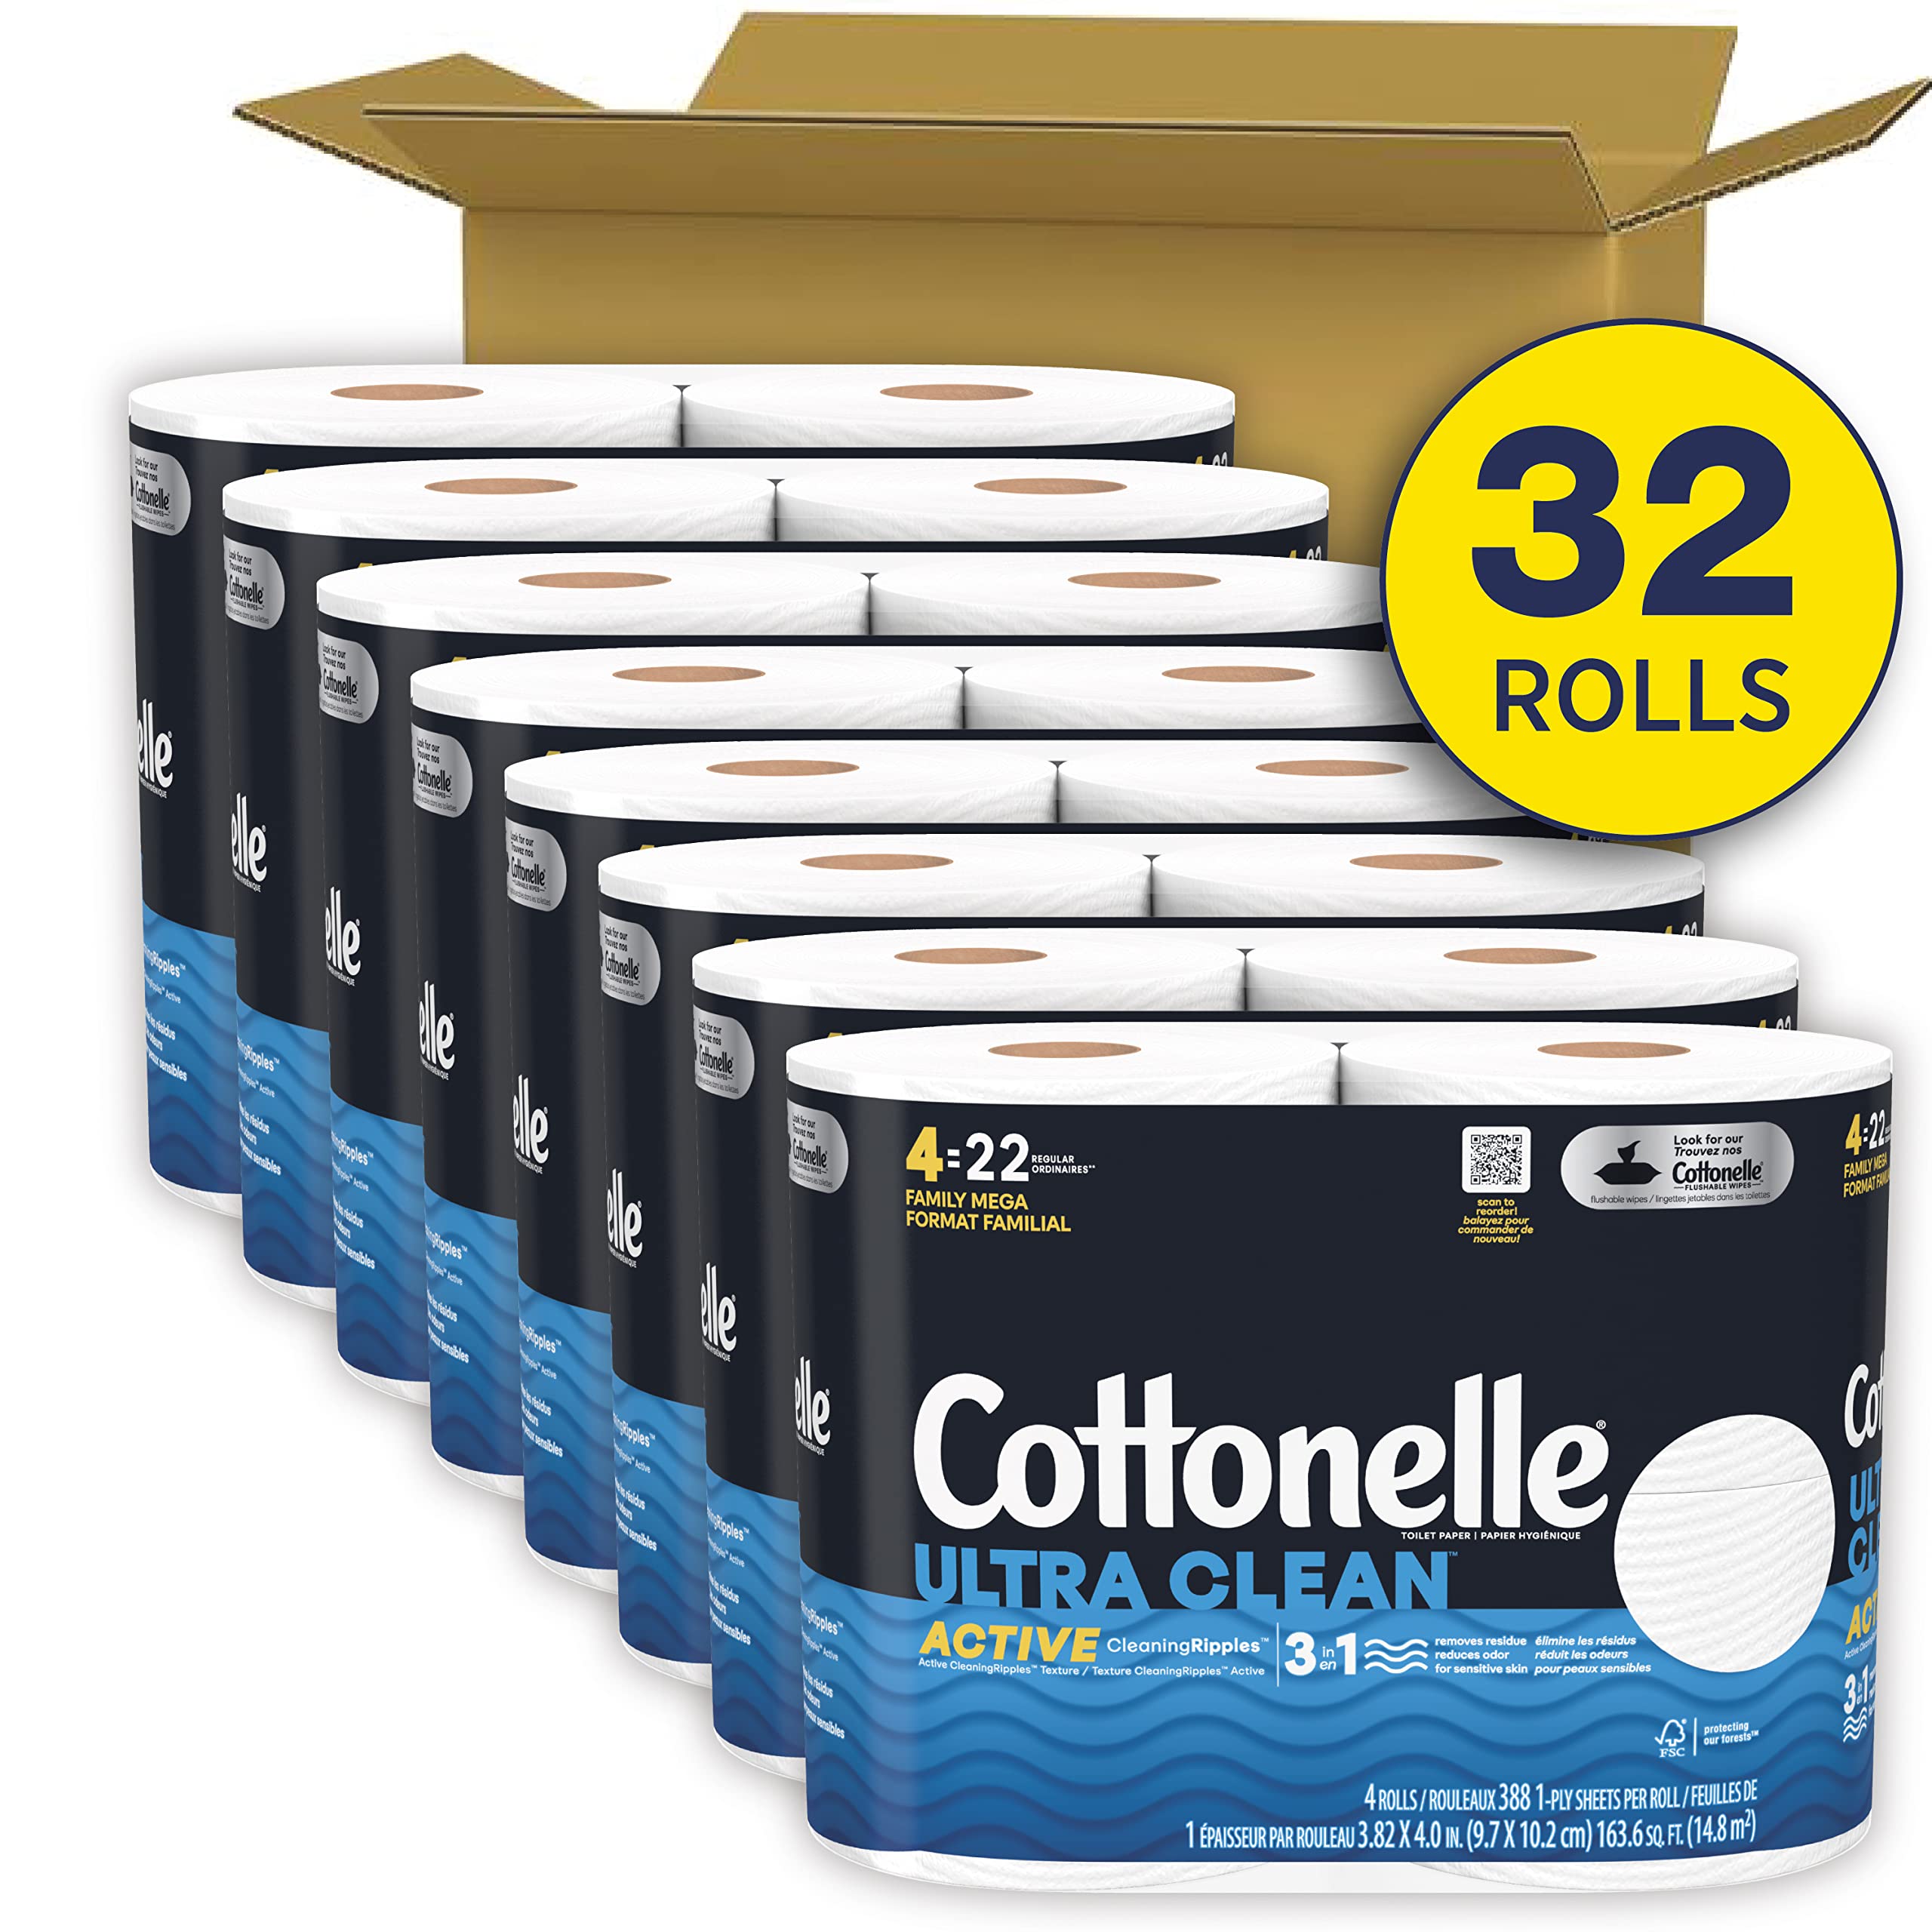 Cottonelle Ultra Clean Toilet Paper with Active CleaningRipples Texture, Strong Bath Tissue, 32 Family Mega Rolls (32 Family Mega Rolls = 176 Regular Rolls) (8 Packs of 4), 388 Sheets per Roll